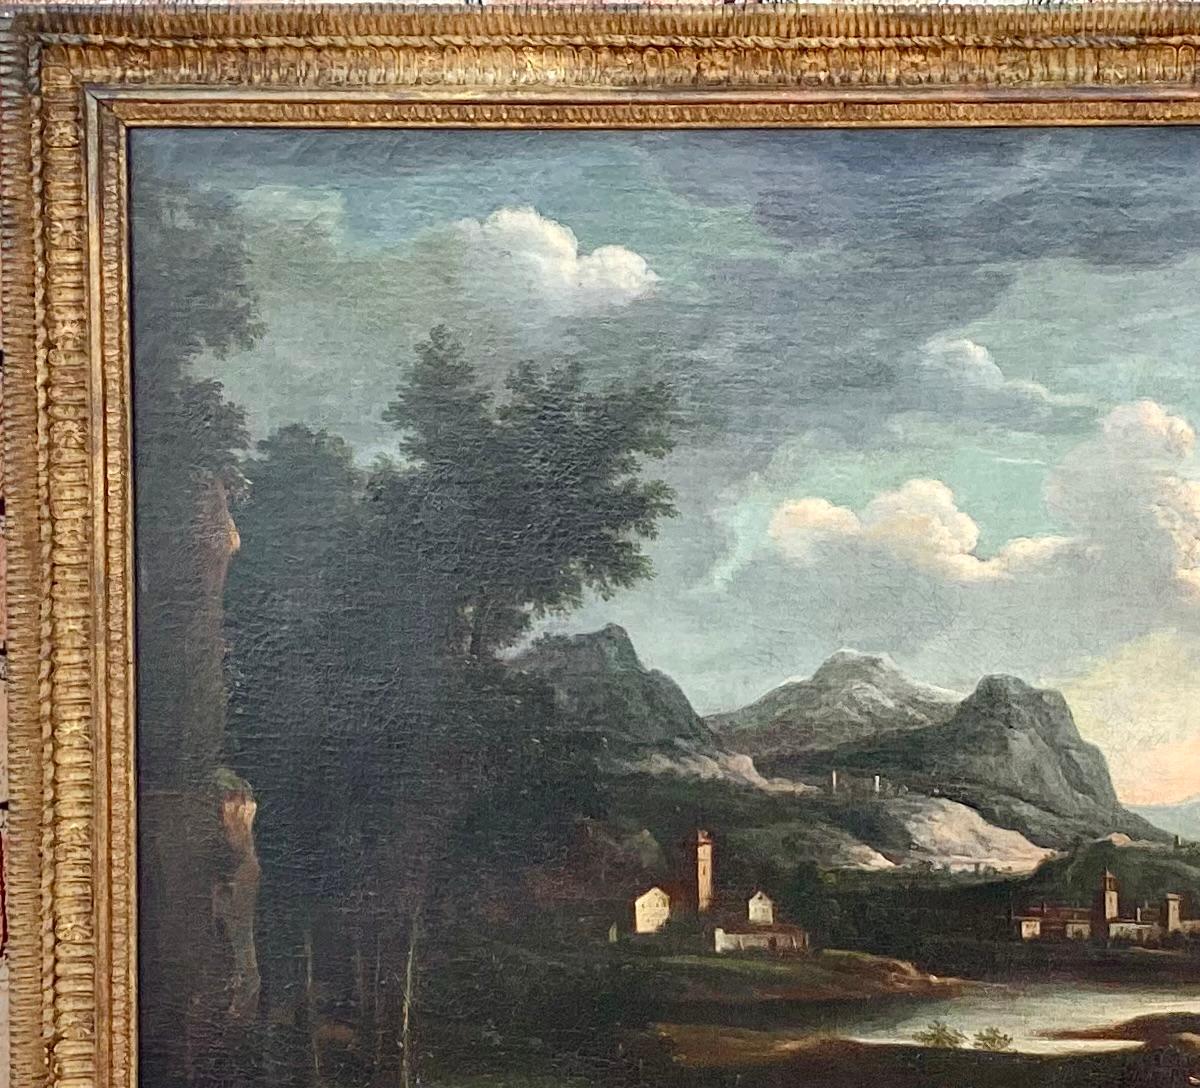 Magnificent 18th century oil on canvas painting of an Italian landscape. Painting features a village, a river with stone bridge and two soldiers on horseback, with mountains in the background. All in muted colors of green, brown, blue and white. 